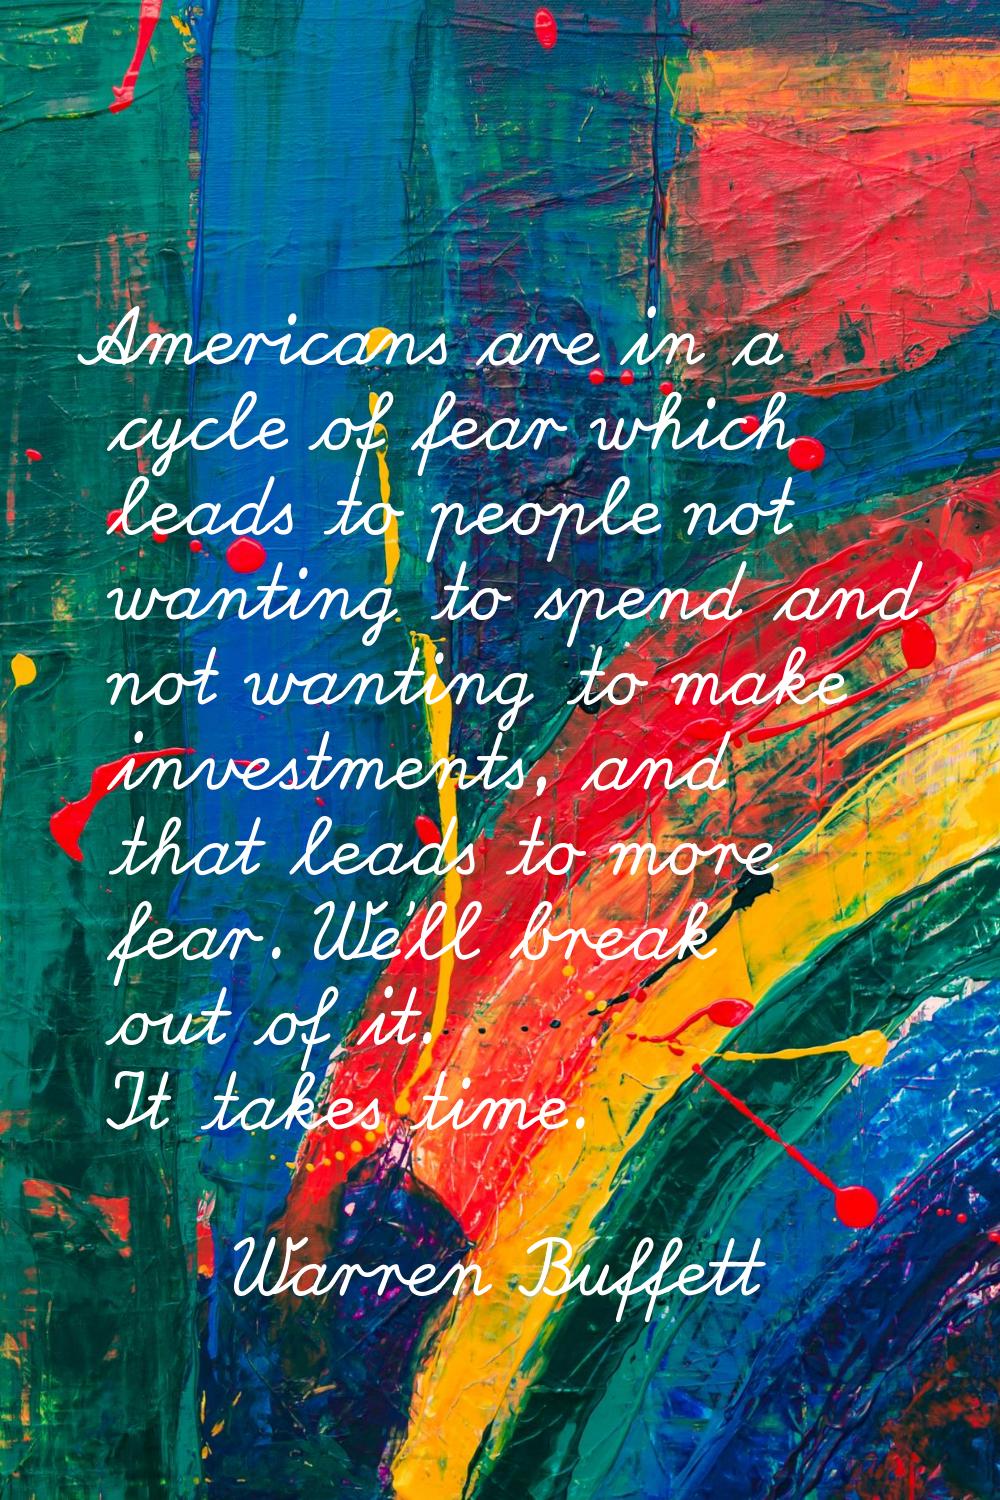 Americans are in a cycle of fear which leads to people not wanting to spend and not wanting to make